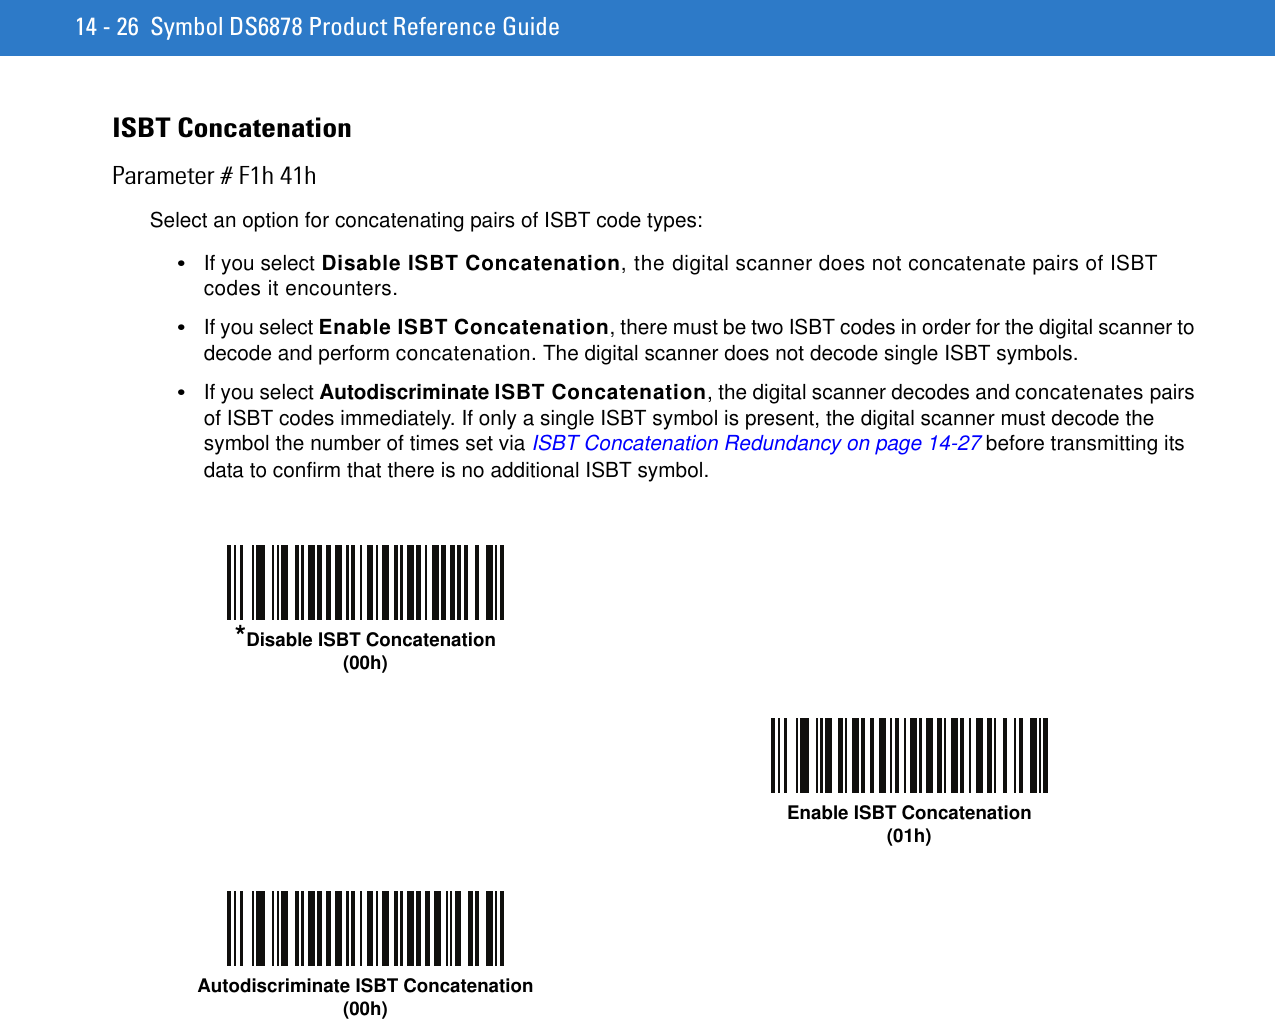 14 - 26 Symbol DS6878 Product Reference GuideISBT ConcatenationParameter # F1h 41hSelect an option for concatenating pairs of ISBT code types:•If you select Disable ISBT Concatenation, the digital scanner does not concatenate pairs of ISBT codes it encounters.•If you select Enable ISBT Concatenation, there must be two ISBT codes in order for the digital scanner to decode and perform concatenation. The digital scanner does not decode single ISBT symbols.•If you select Autodiscriminate ISBT Concatenation, the digital scanner decodes and concatenates pairs of ISBT codes immediately. If only a single ISBT symbol is present, the digital scanner must decode the symbol the number of times set via ISBT Concatenation Redundancy on page 14-27 before transmitting its data to confirm that there is no additional ISBT symbol.*Disable ISBT Concatenation(00h)Enable ISBT Concatenation(01h)Autodiscriminate ISBT Concatenation(00h)